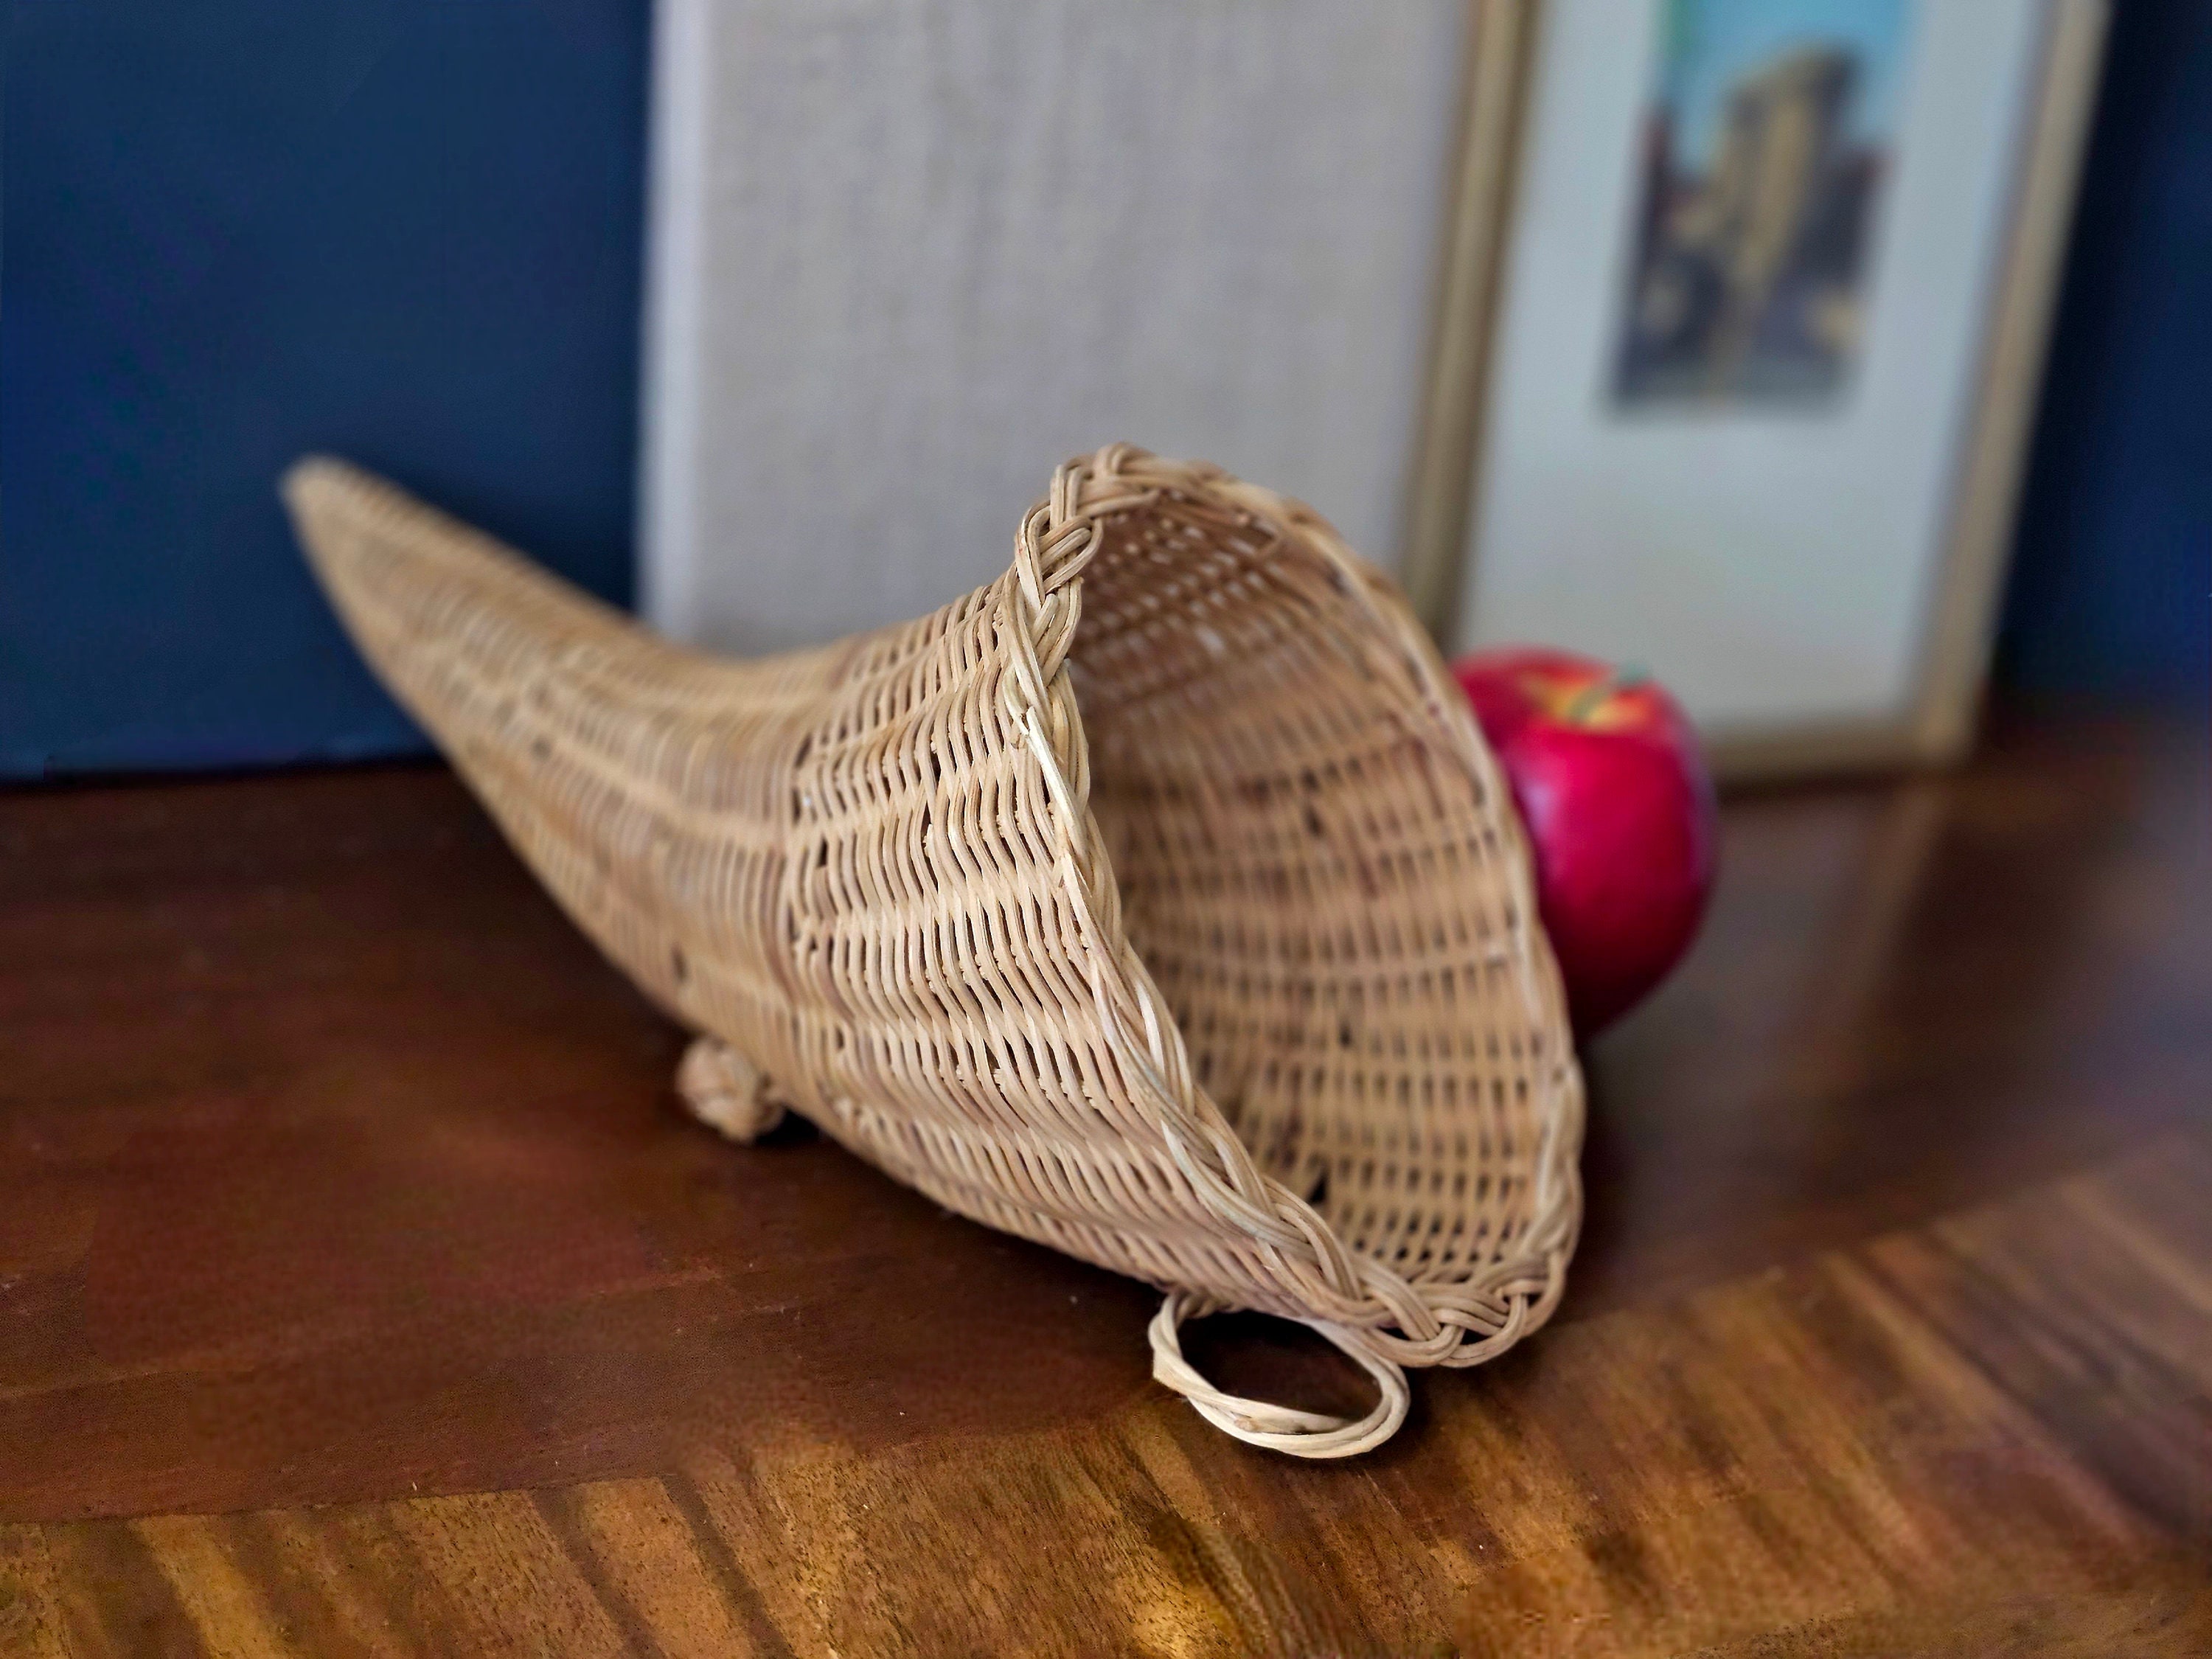 Classic Woven Wooden Basket Harvest Blessings Large Stave 4 Kids Company